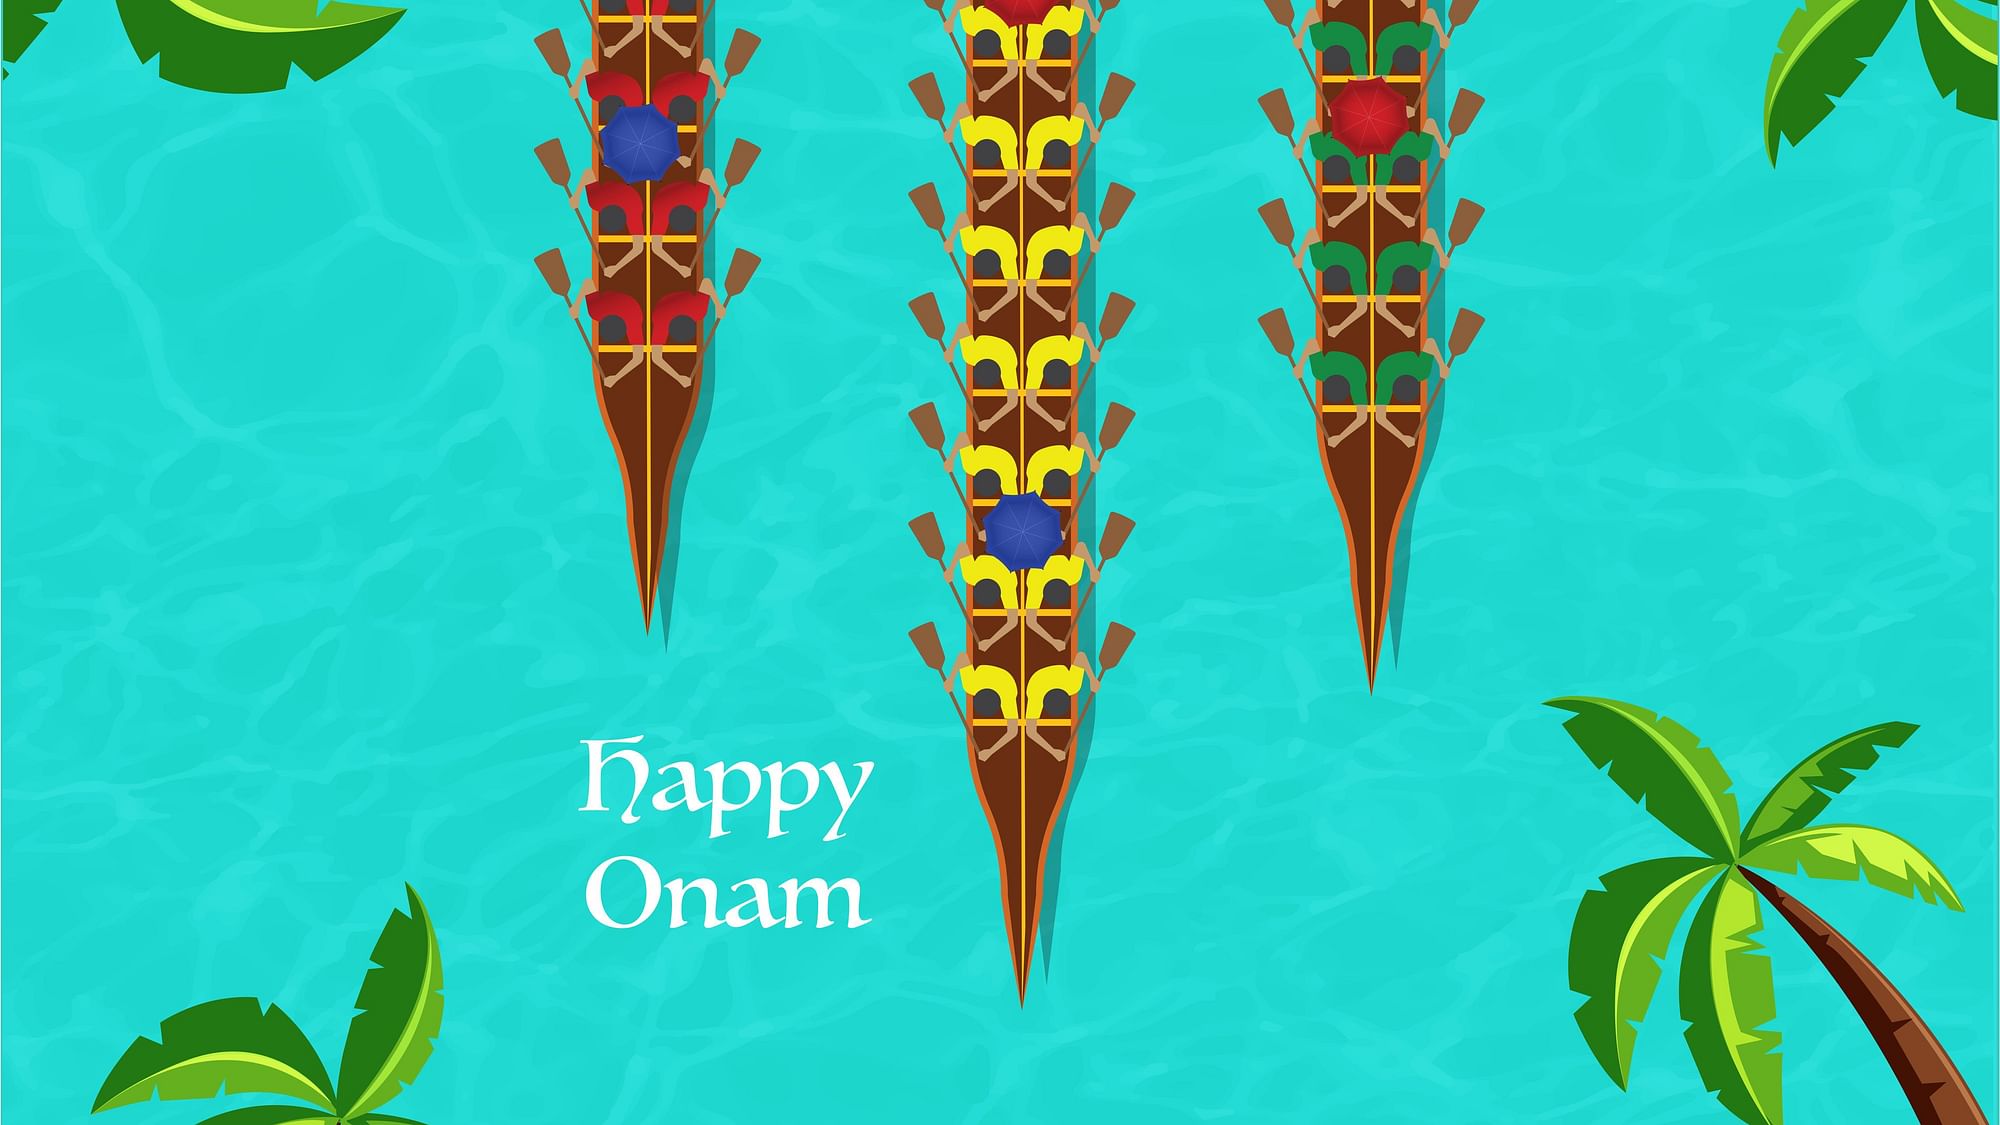 Happy Onam 2020 wishes, Images, Greetings and Quotes